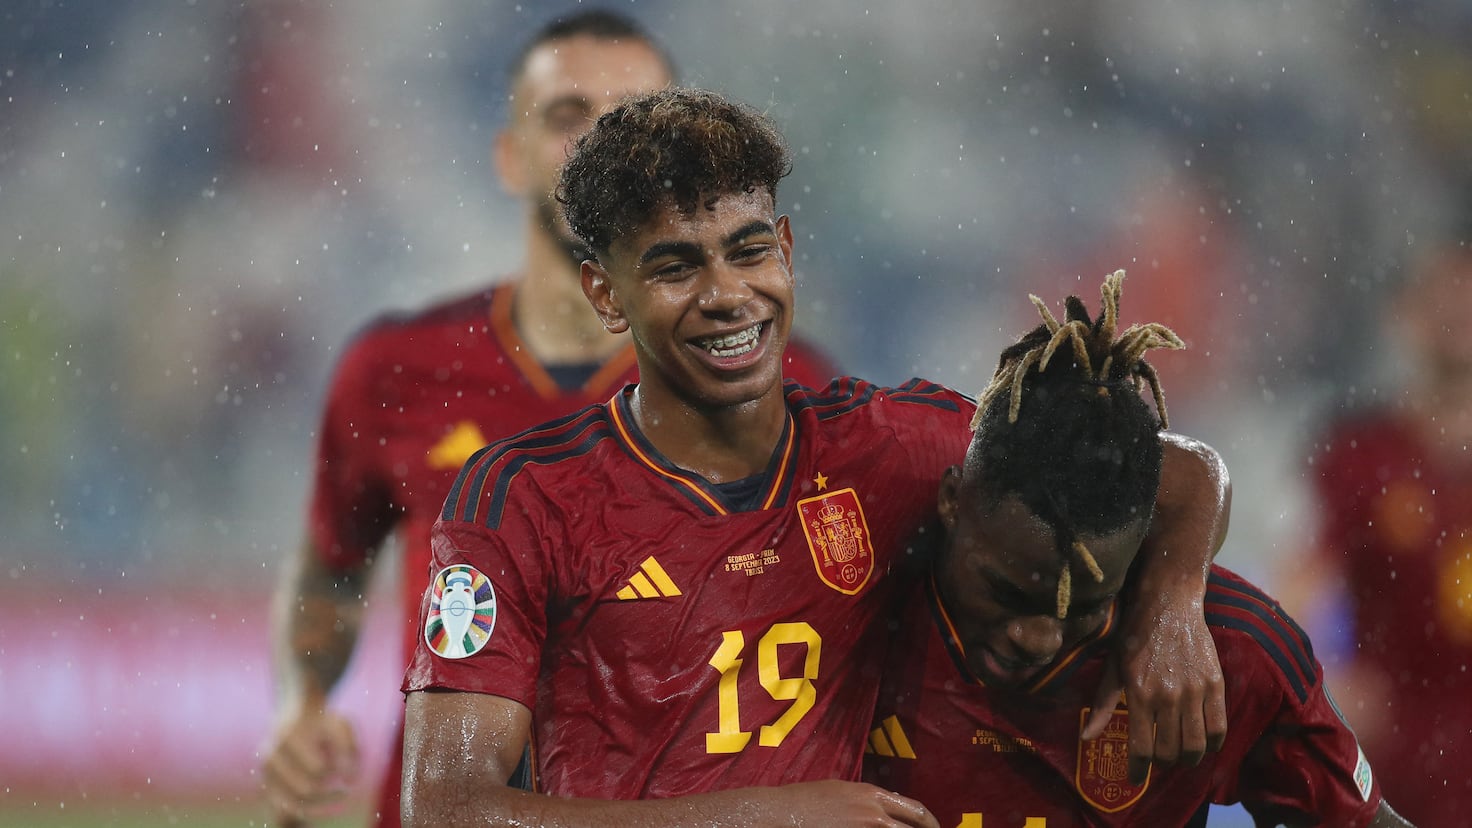 16-Year-Old Prodigy Wows in Spain's Powerhouse Squad!